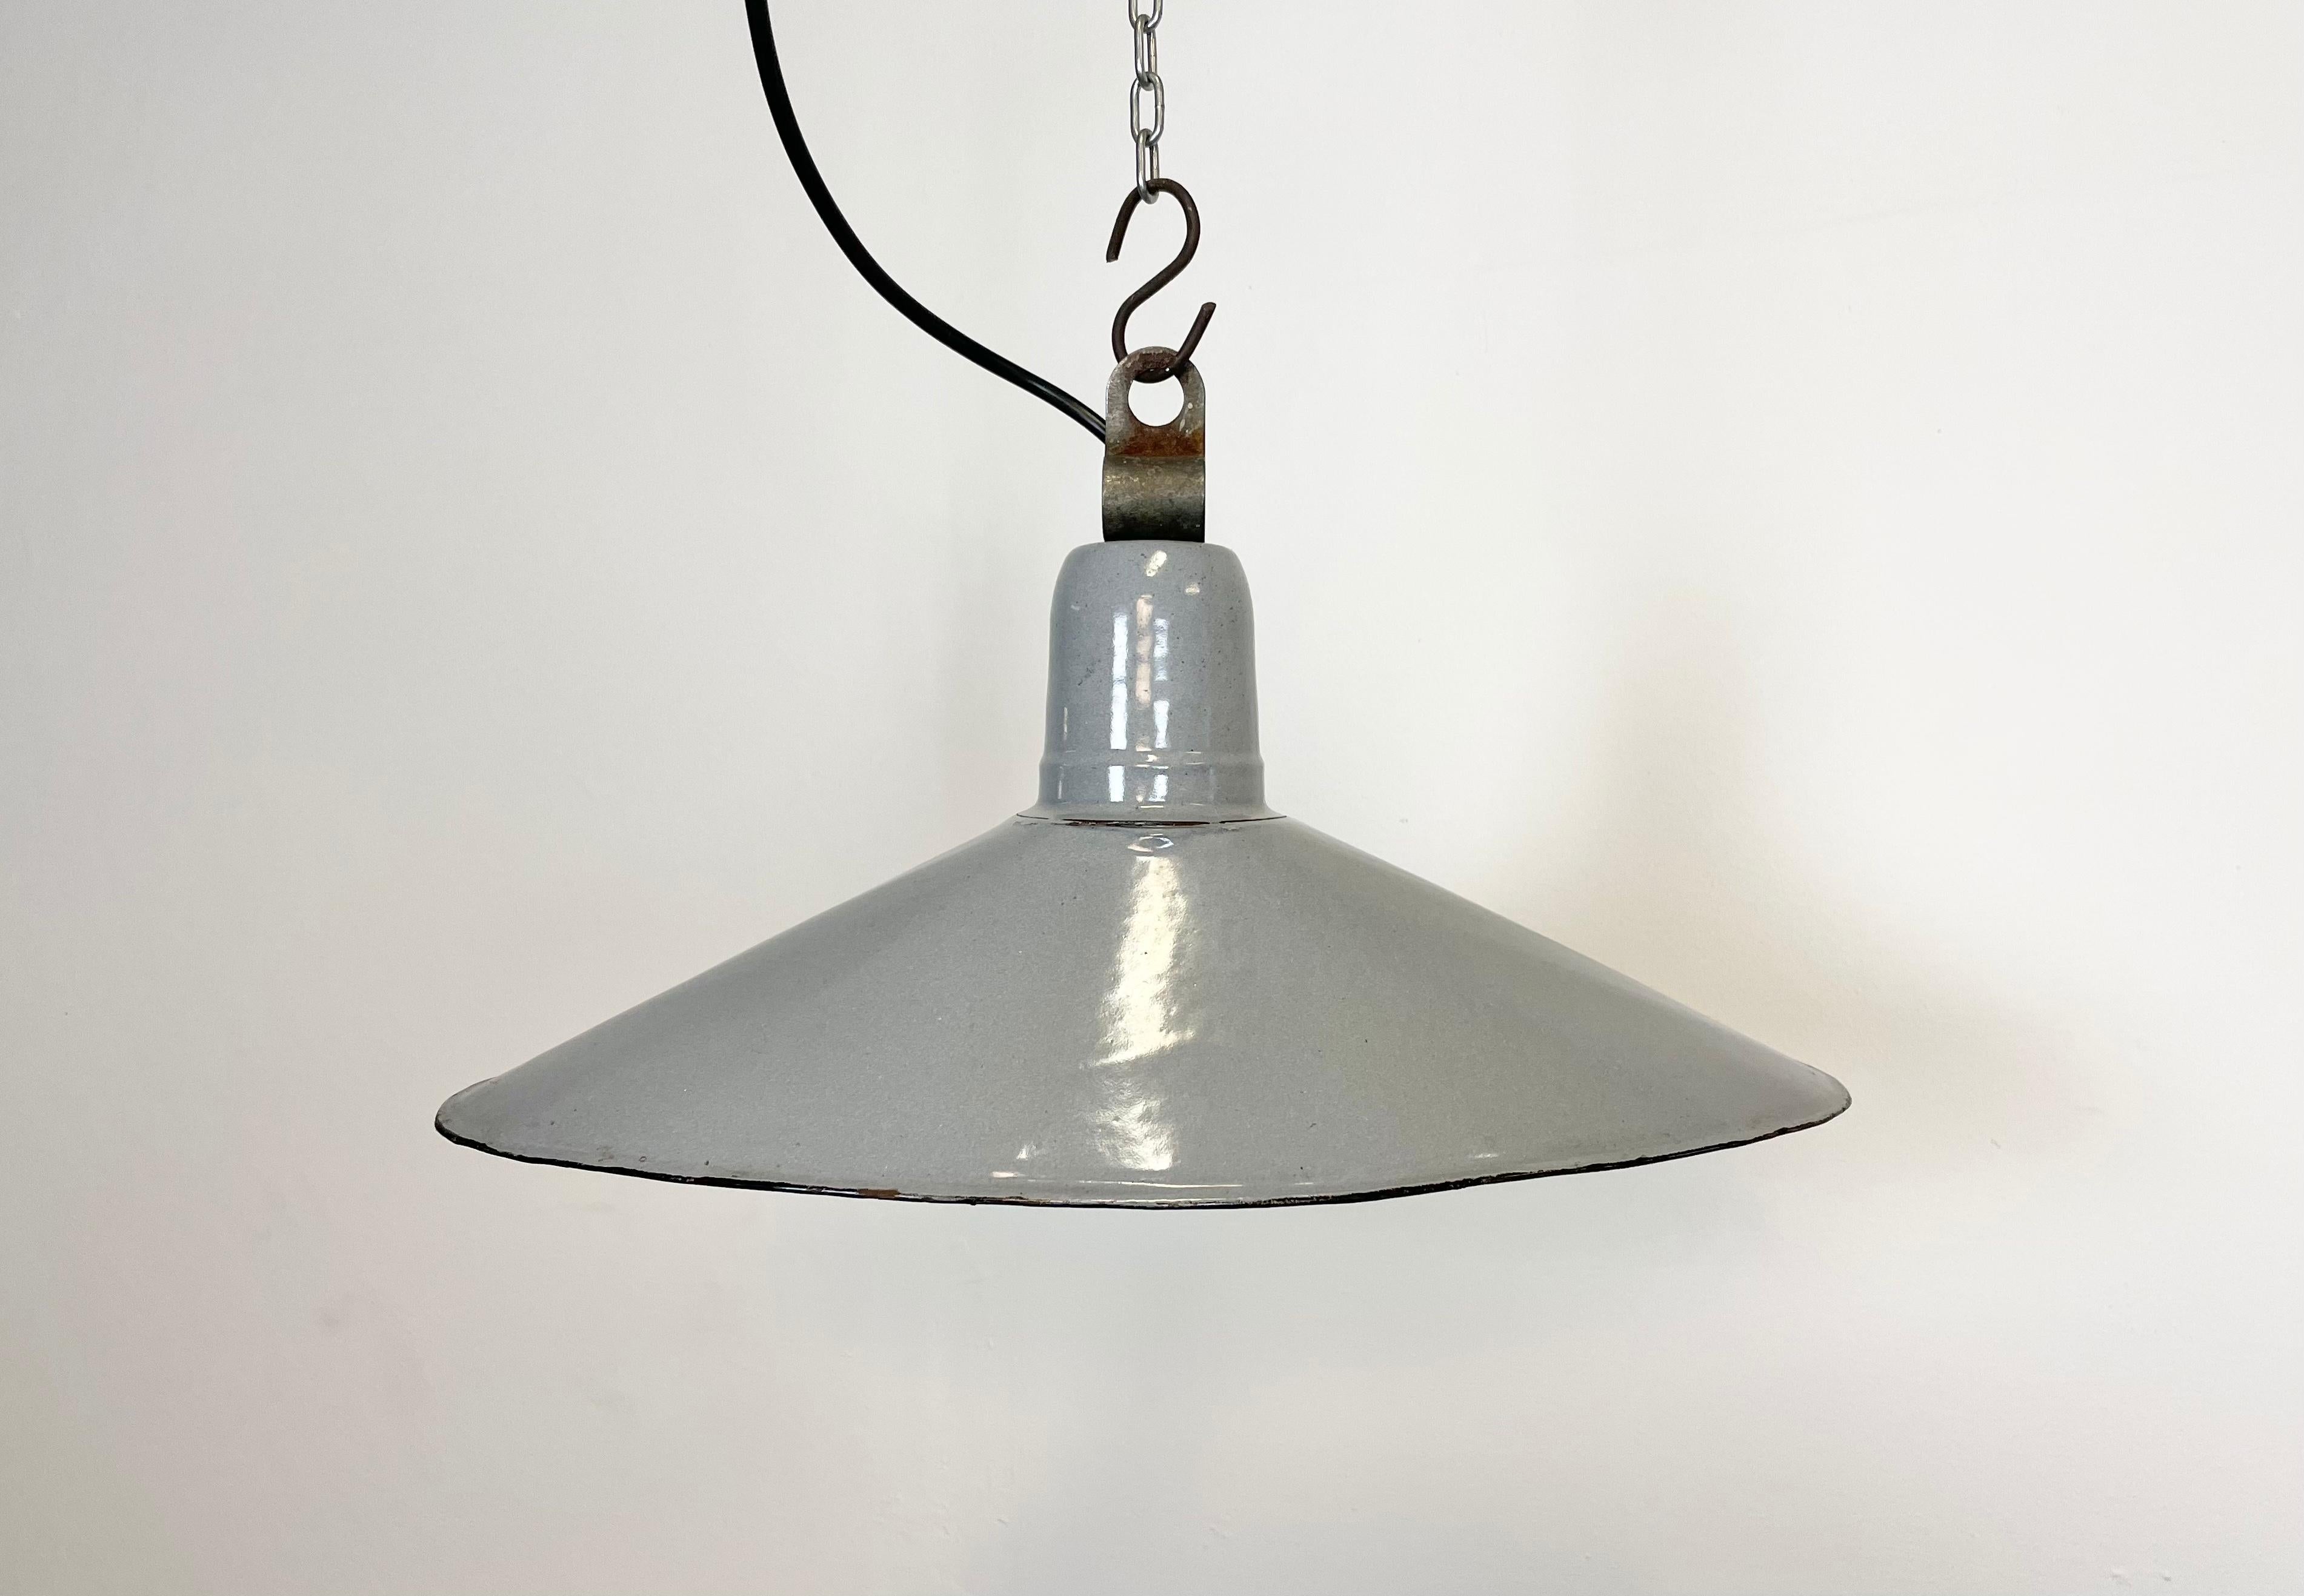 Vintage industrial grey enamel pendant lamp from the 1930s. It features a grey enamel shade with white enamel interior and iron top. Original porcelain socket requires E 27 light bulbs. New wire. Unusual shape of the lampshade.